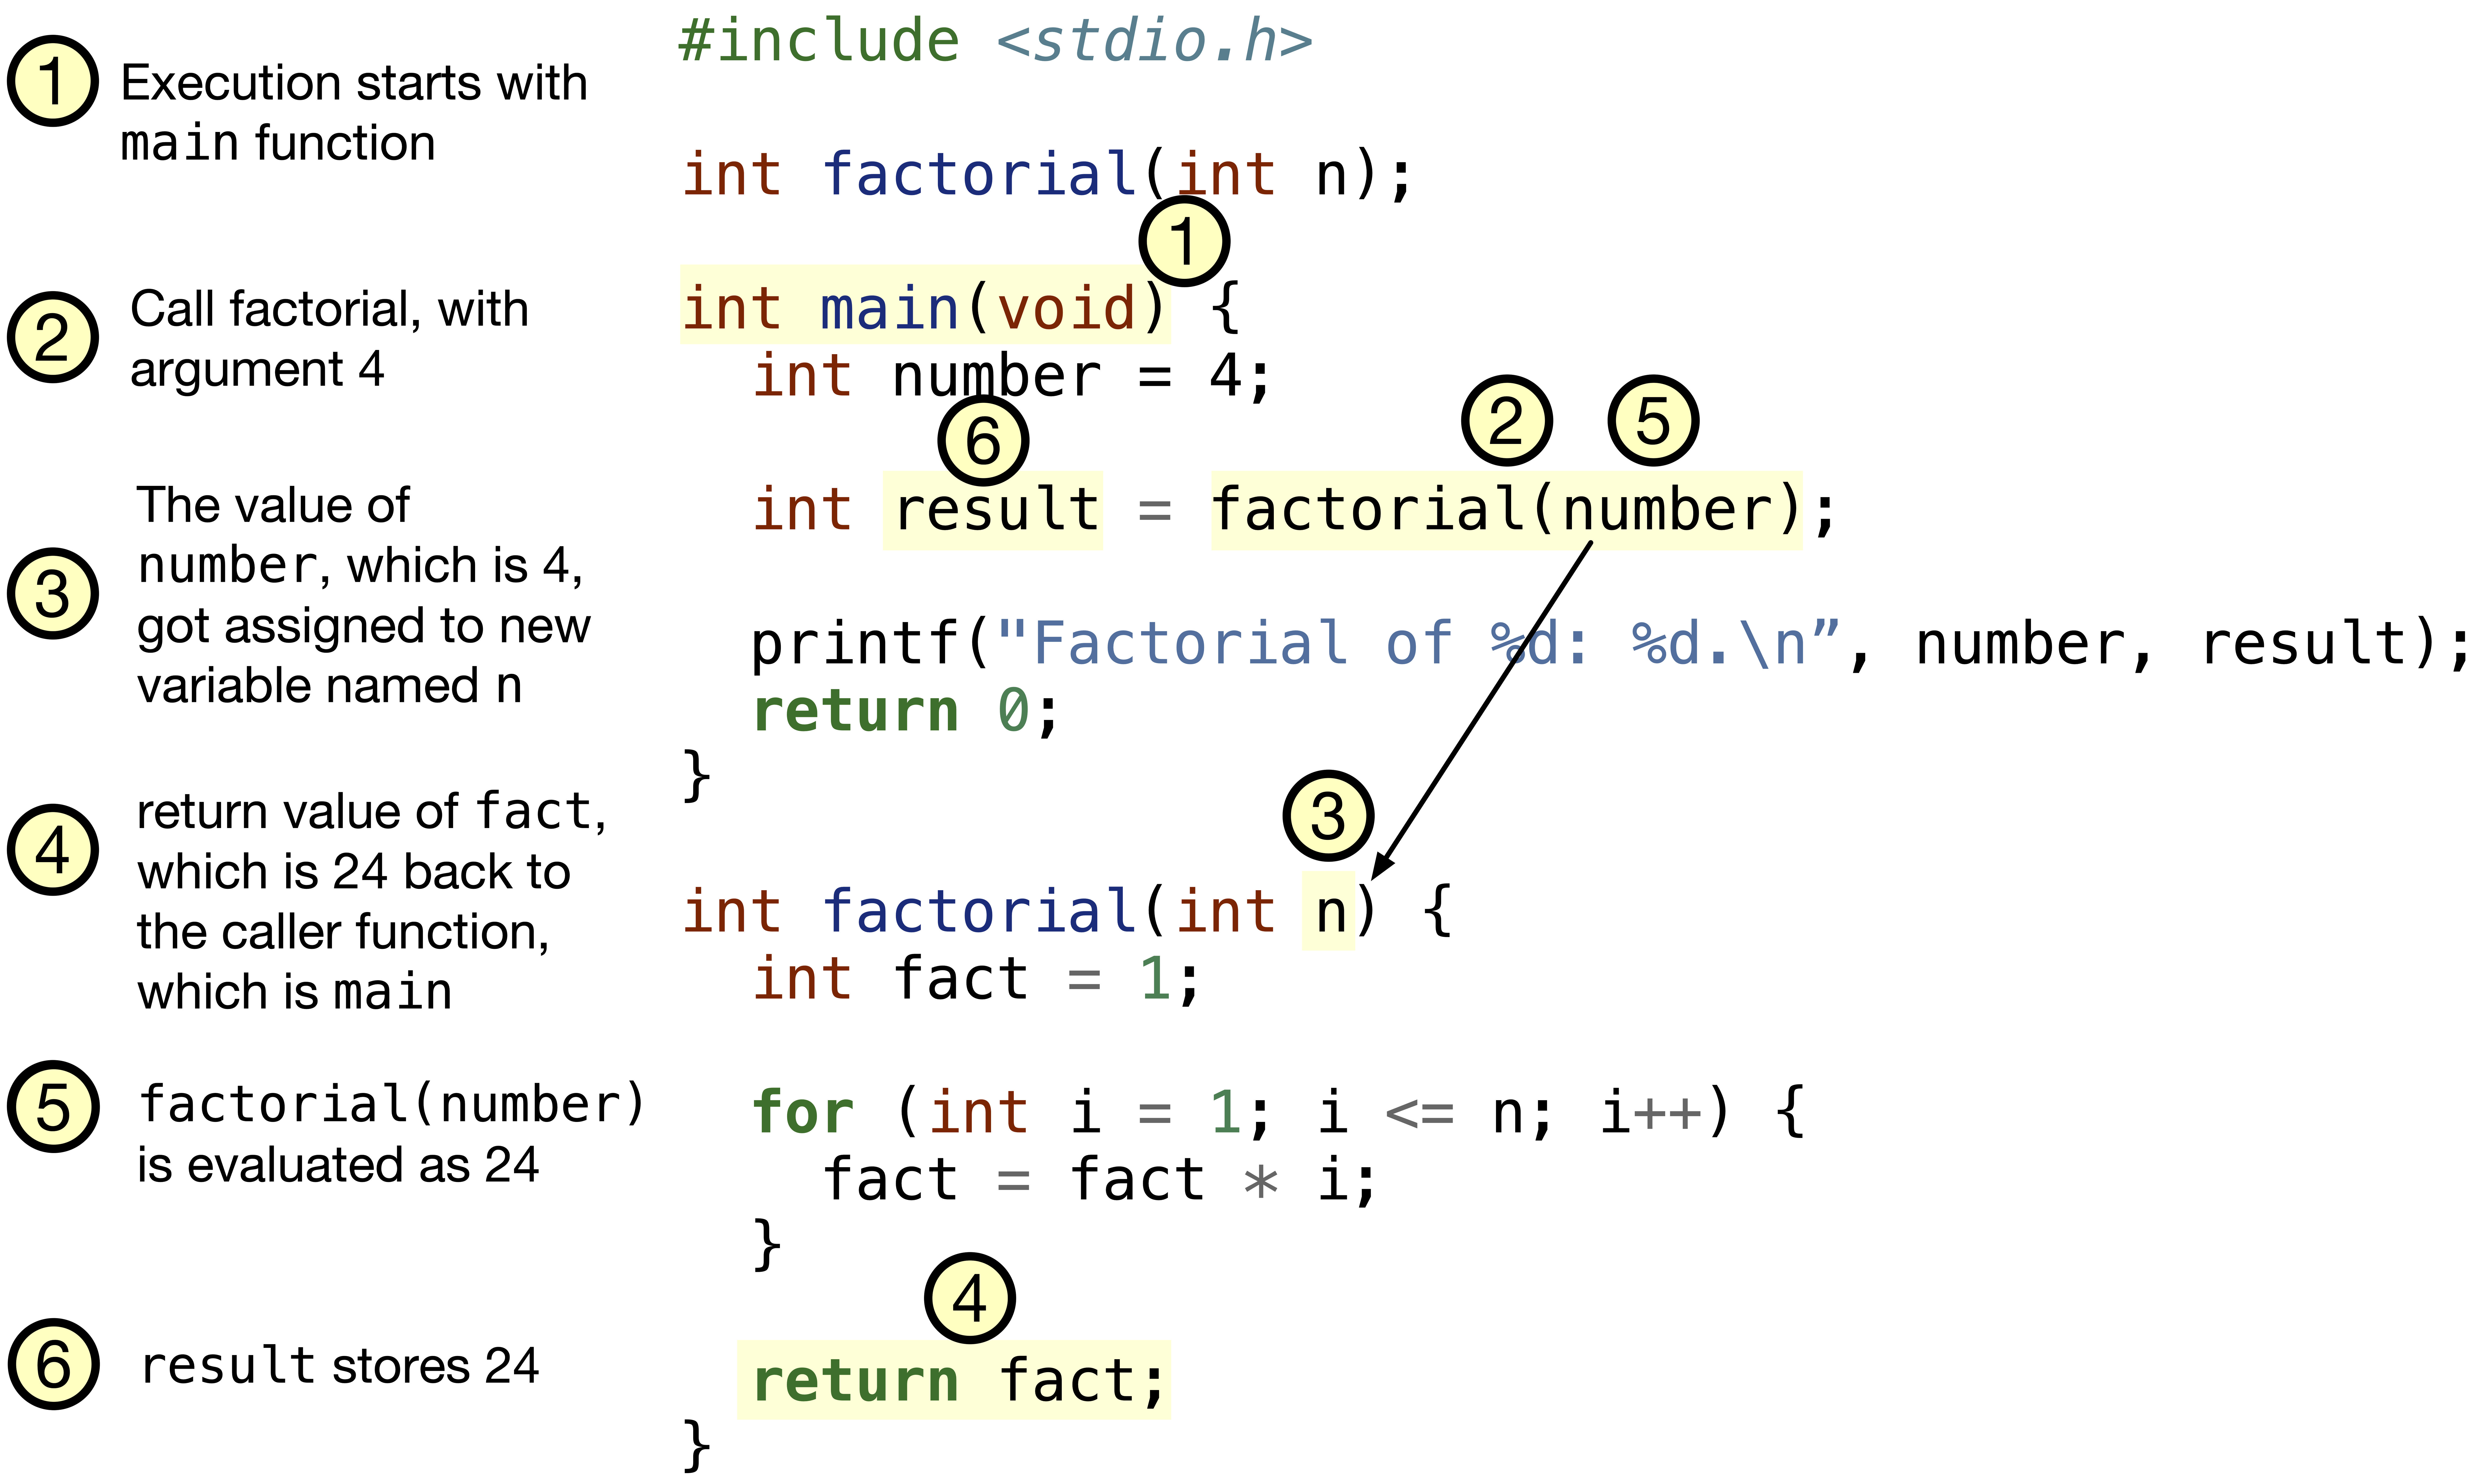 Order of execution in a code that gets the factorial.